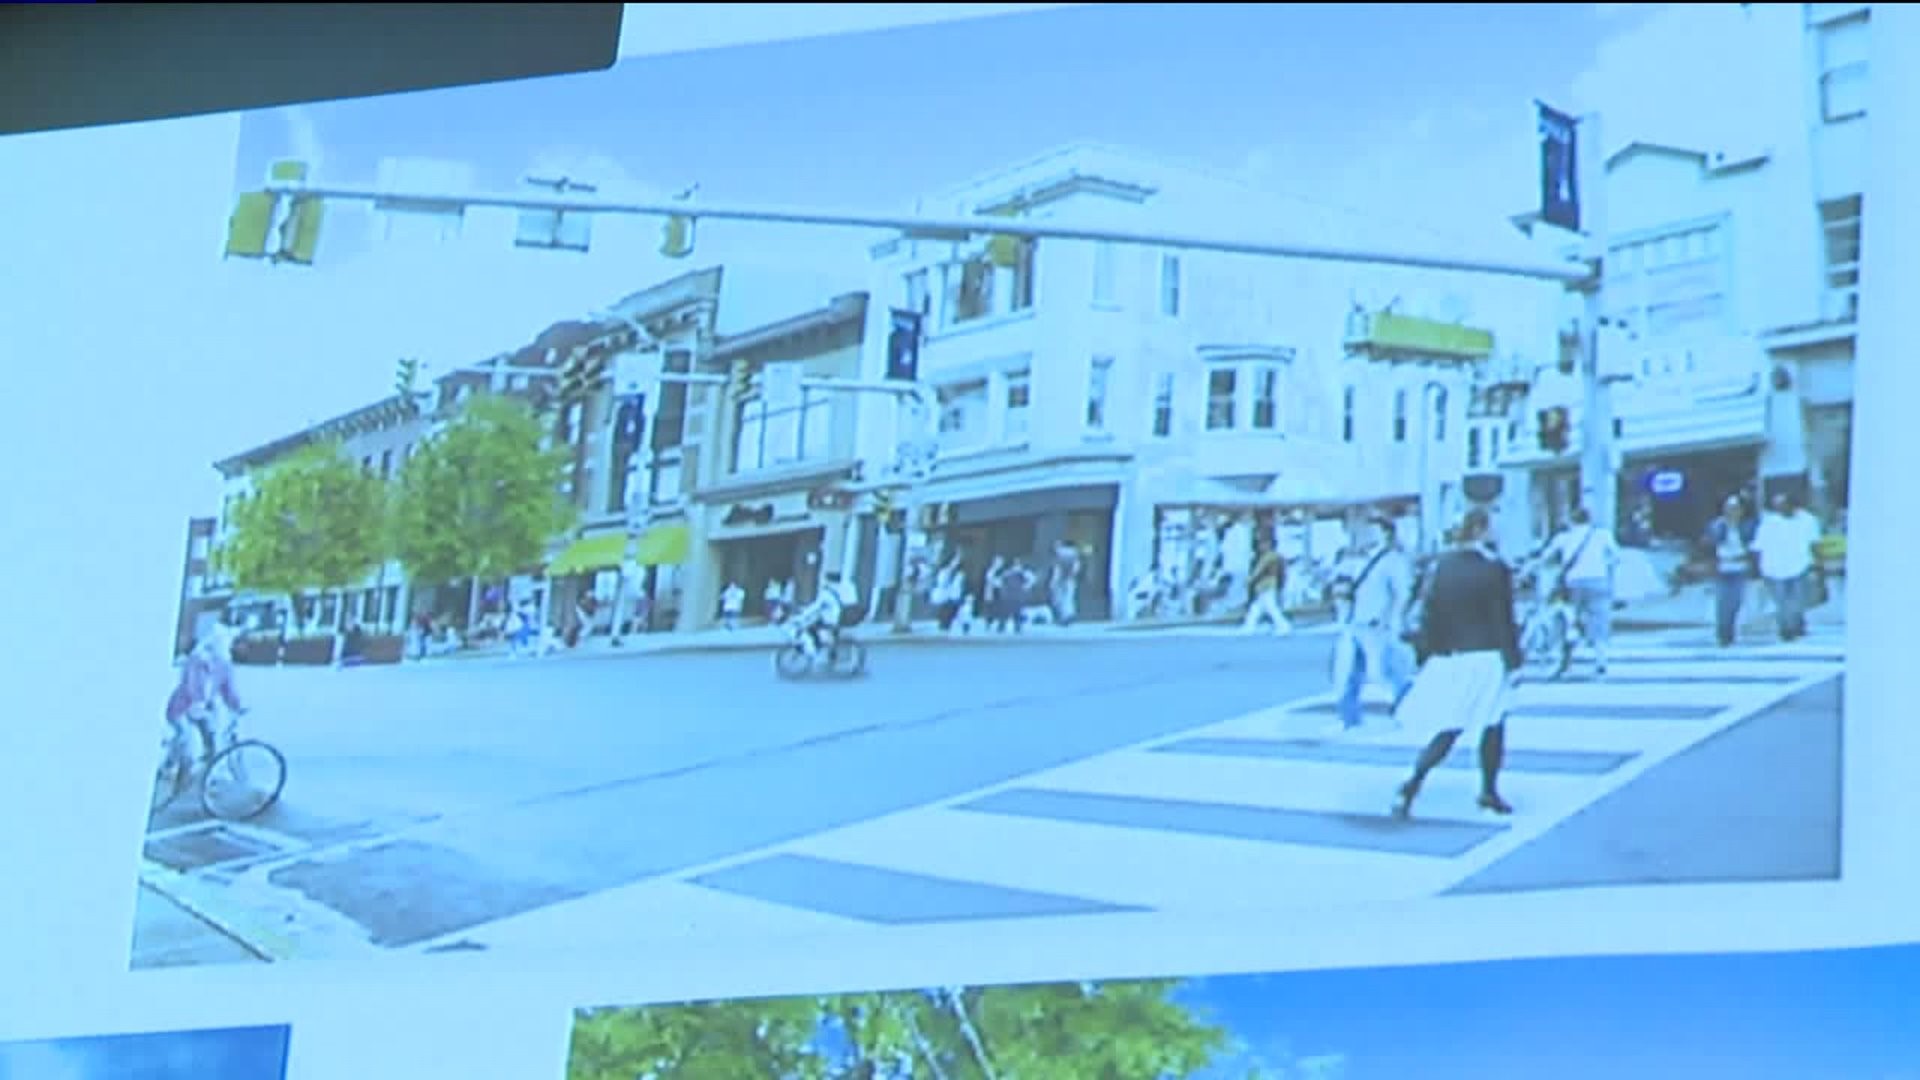 'Pottsville is coming back' - Business Leaders Hopeful about Downtown Revival